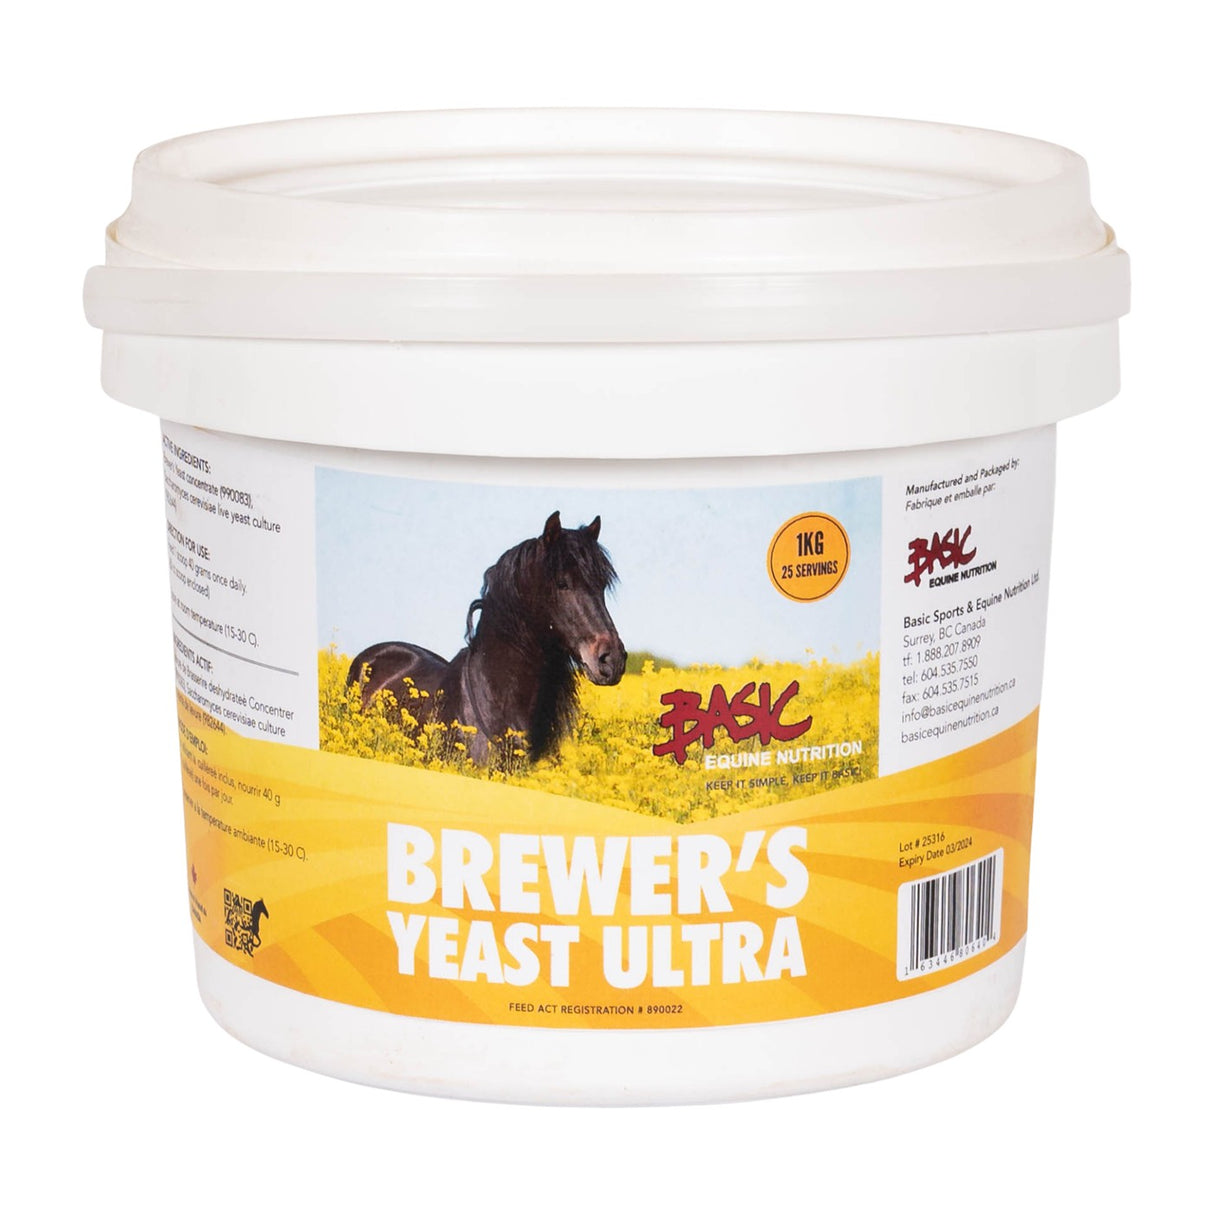 Basic Equine Nutrition Brewer's Yeast Ultra 1 Kg